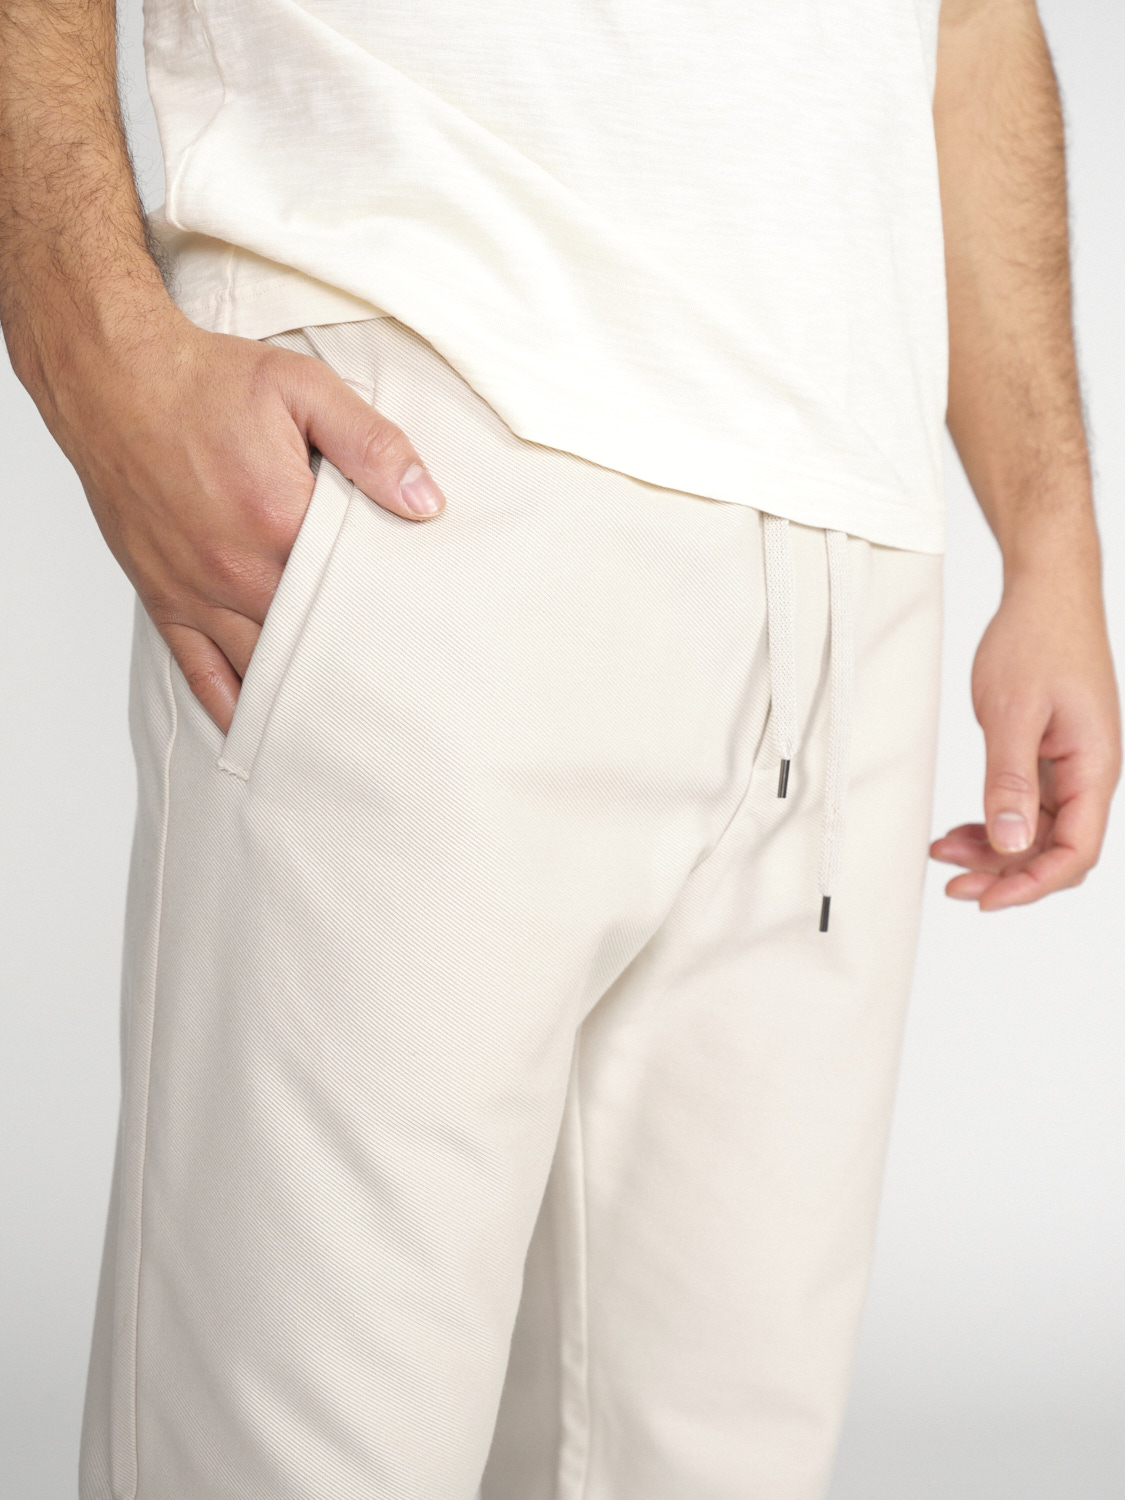 Harris Wharf London Jogging twill - cotton trousers in jogging style creme 48